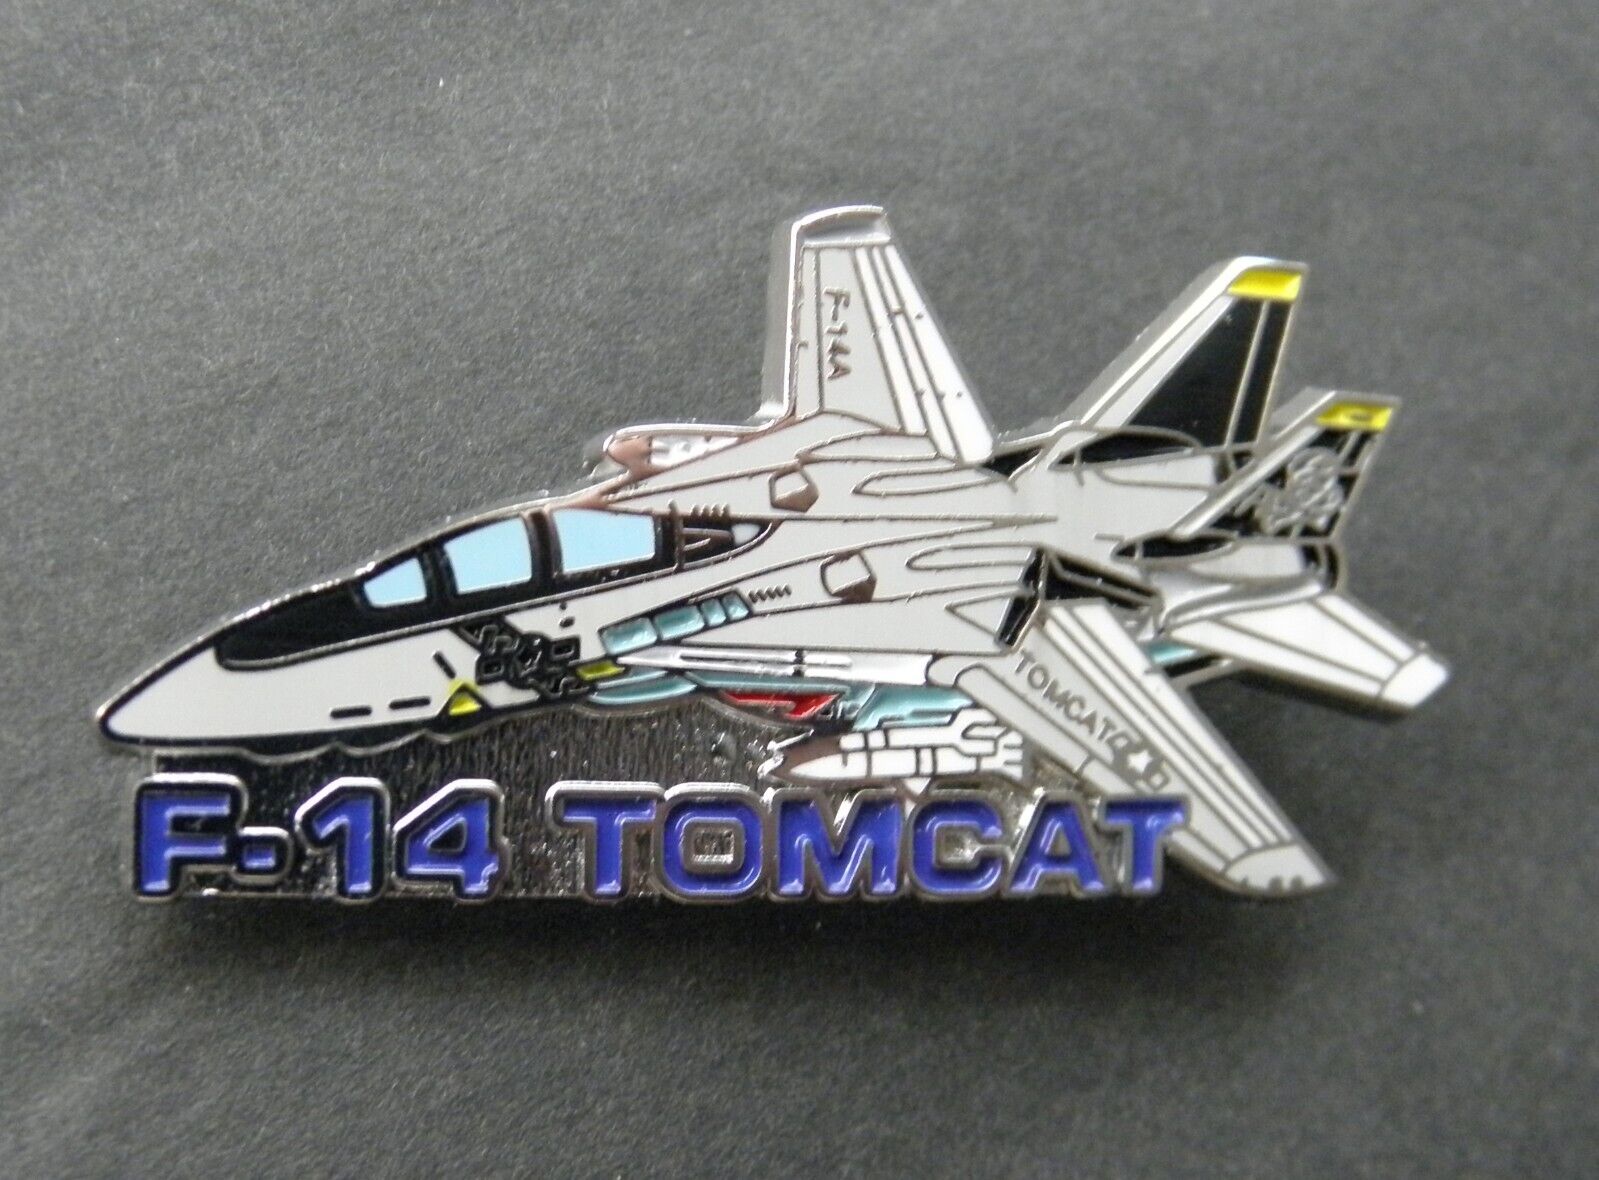 US NAVY F-14A TOMCAT FIGHTER AIRCRAFT LARGE LAPEL HAT PIN 2 INCHES NEW